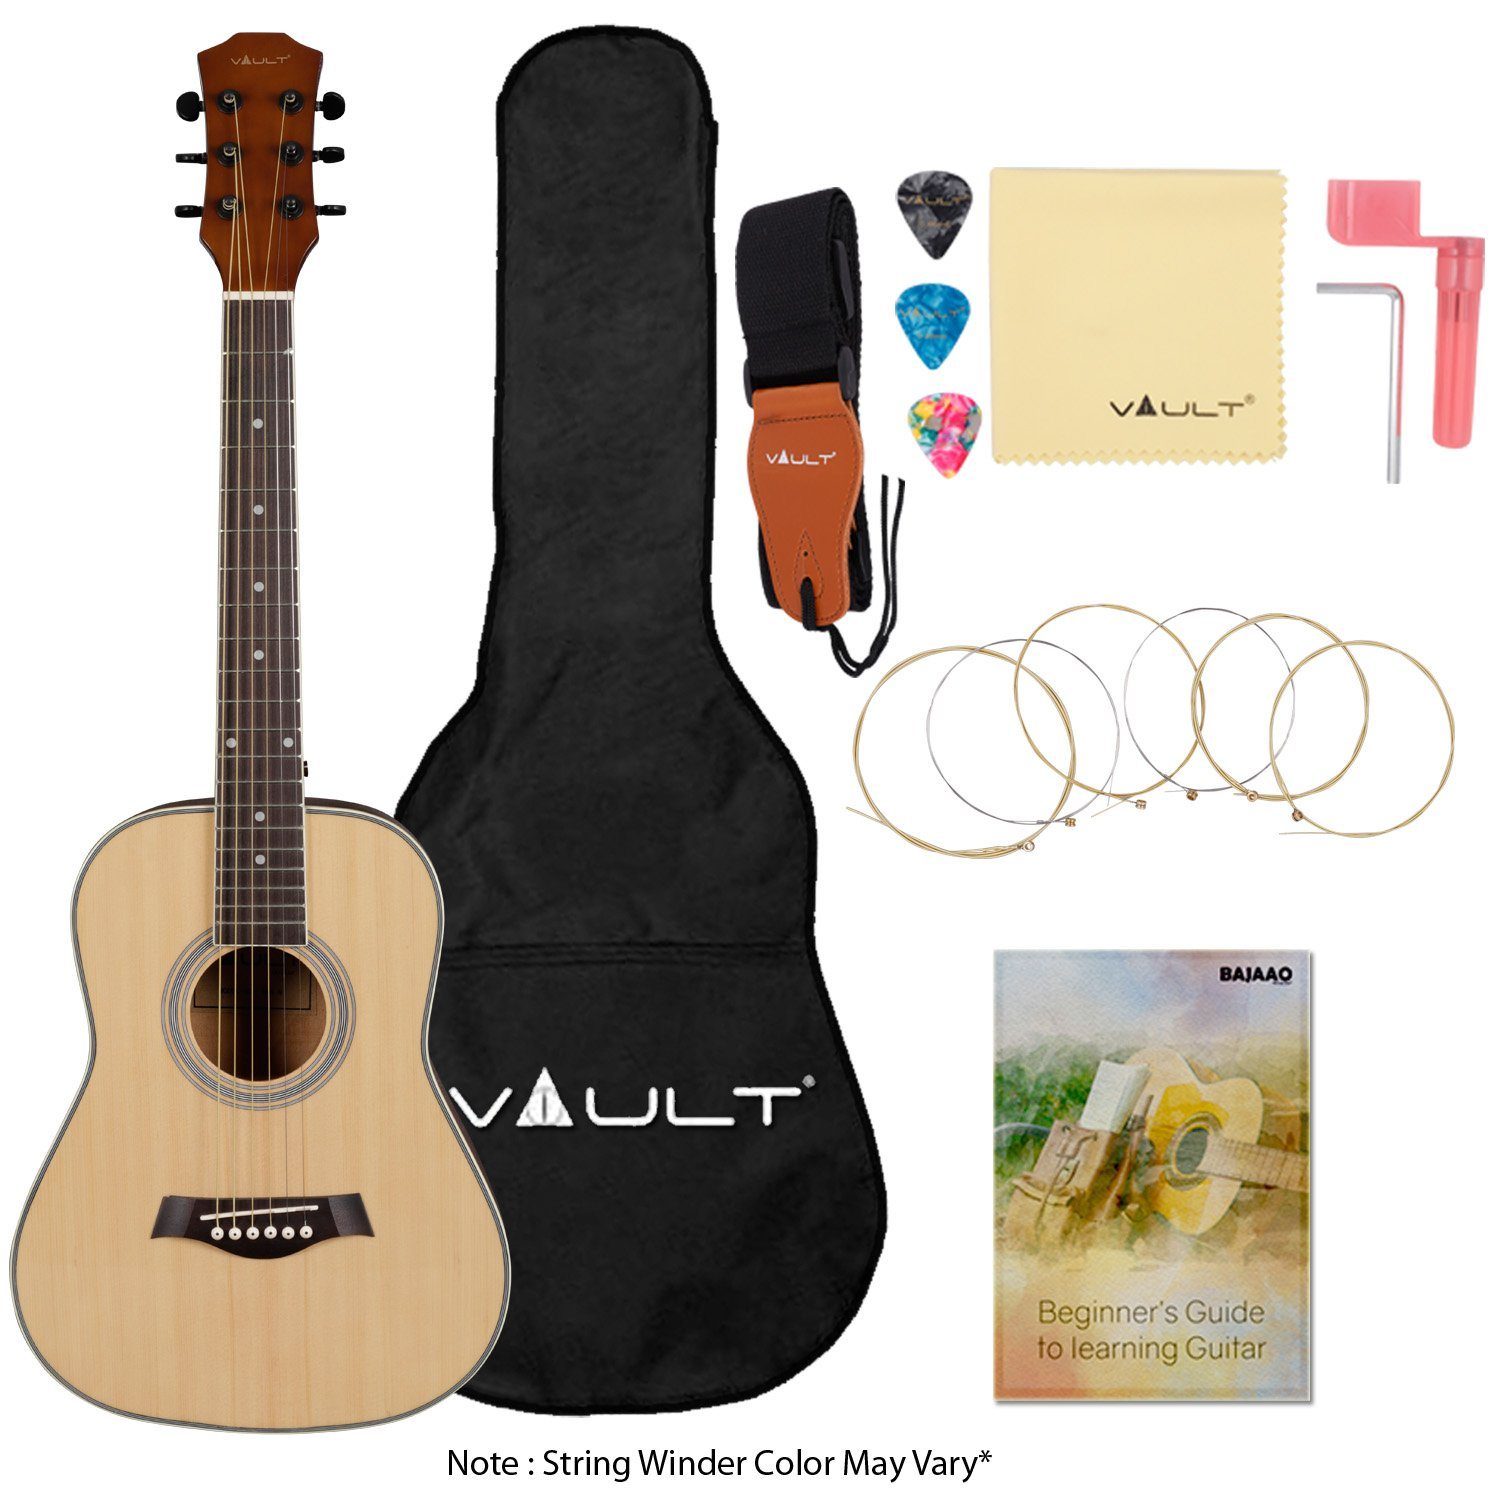 Image of Vault Traveller 3/4 Size Acoustic Guitar With Gig bag, Strings, Polishing Cloth, String Winder and Picks - Natural Gloss